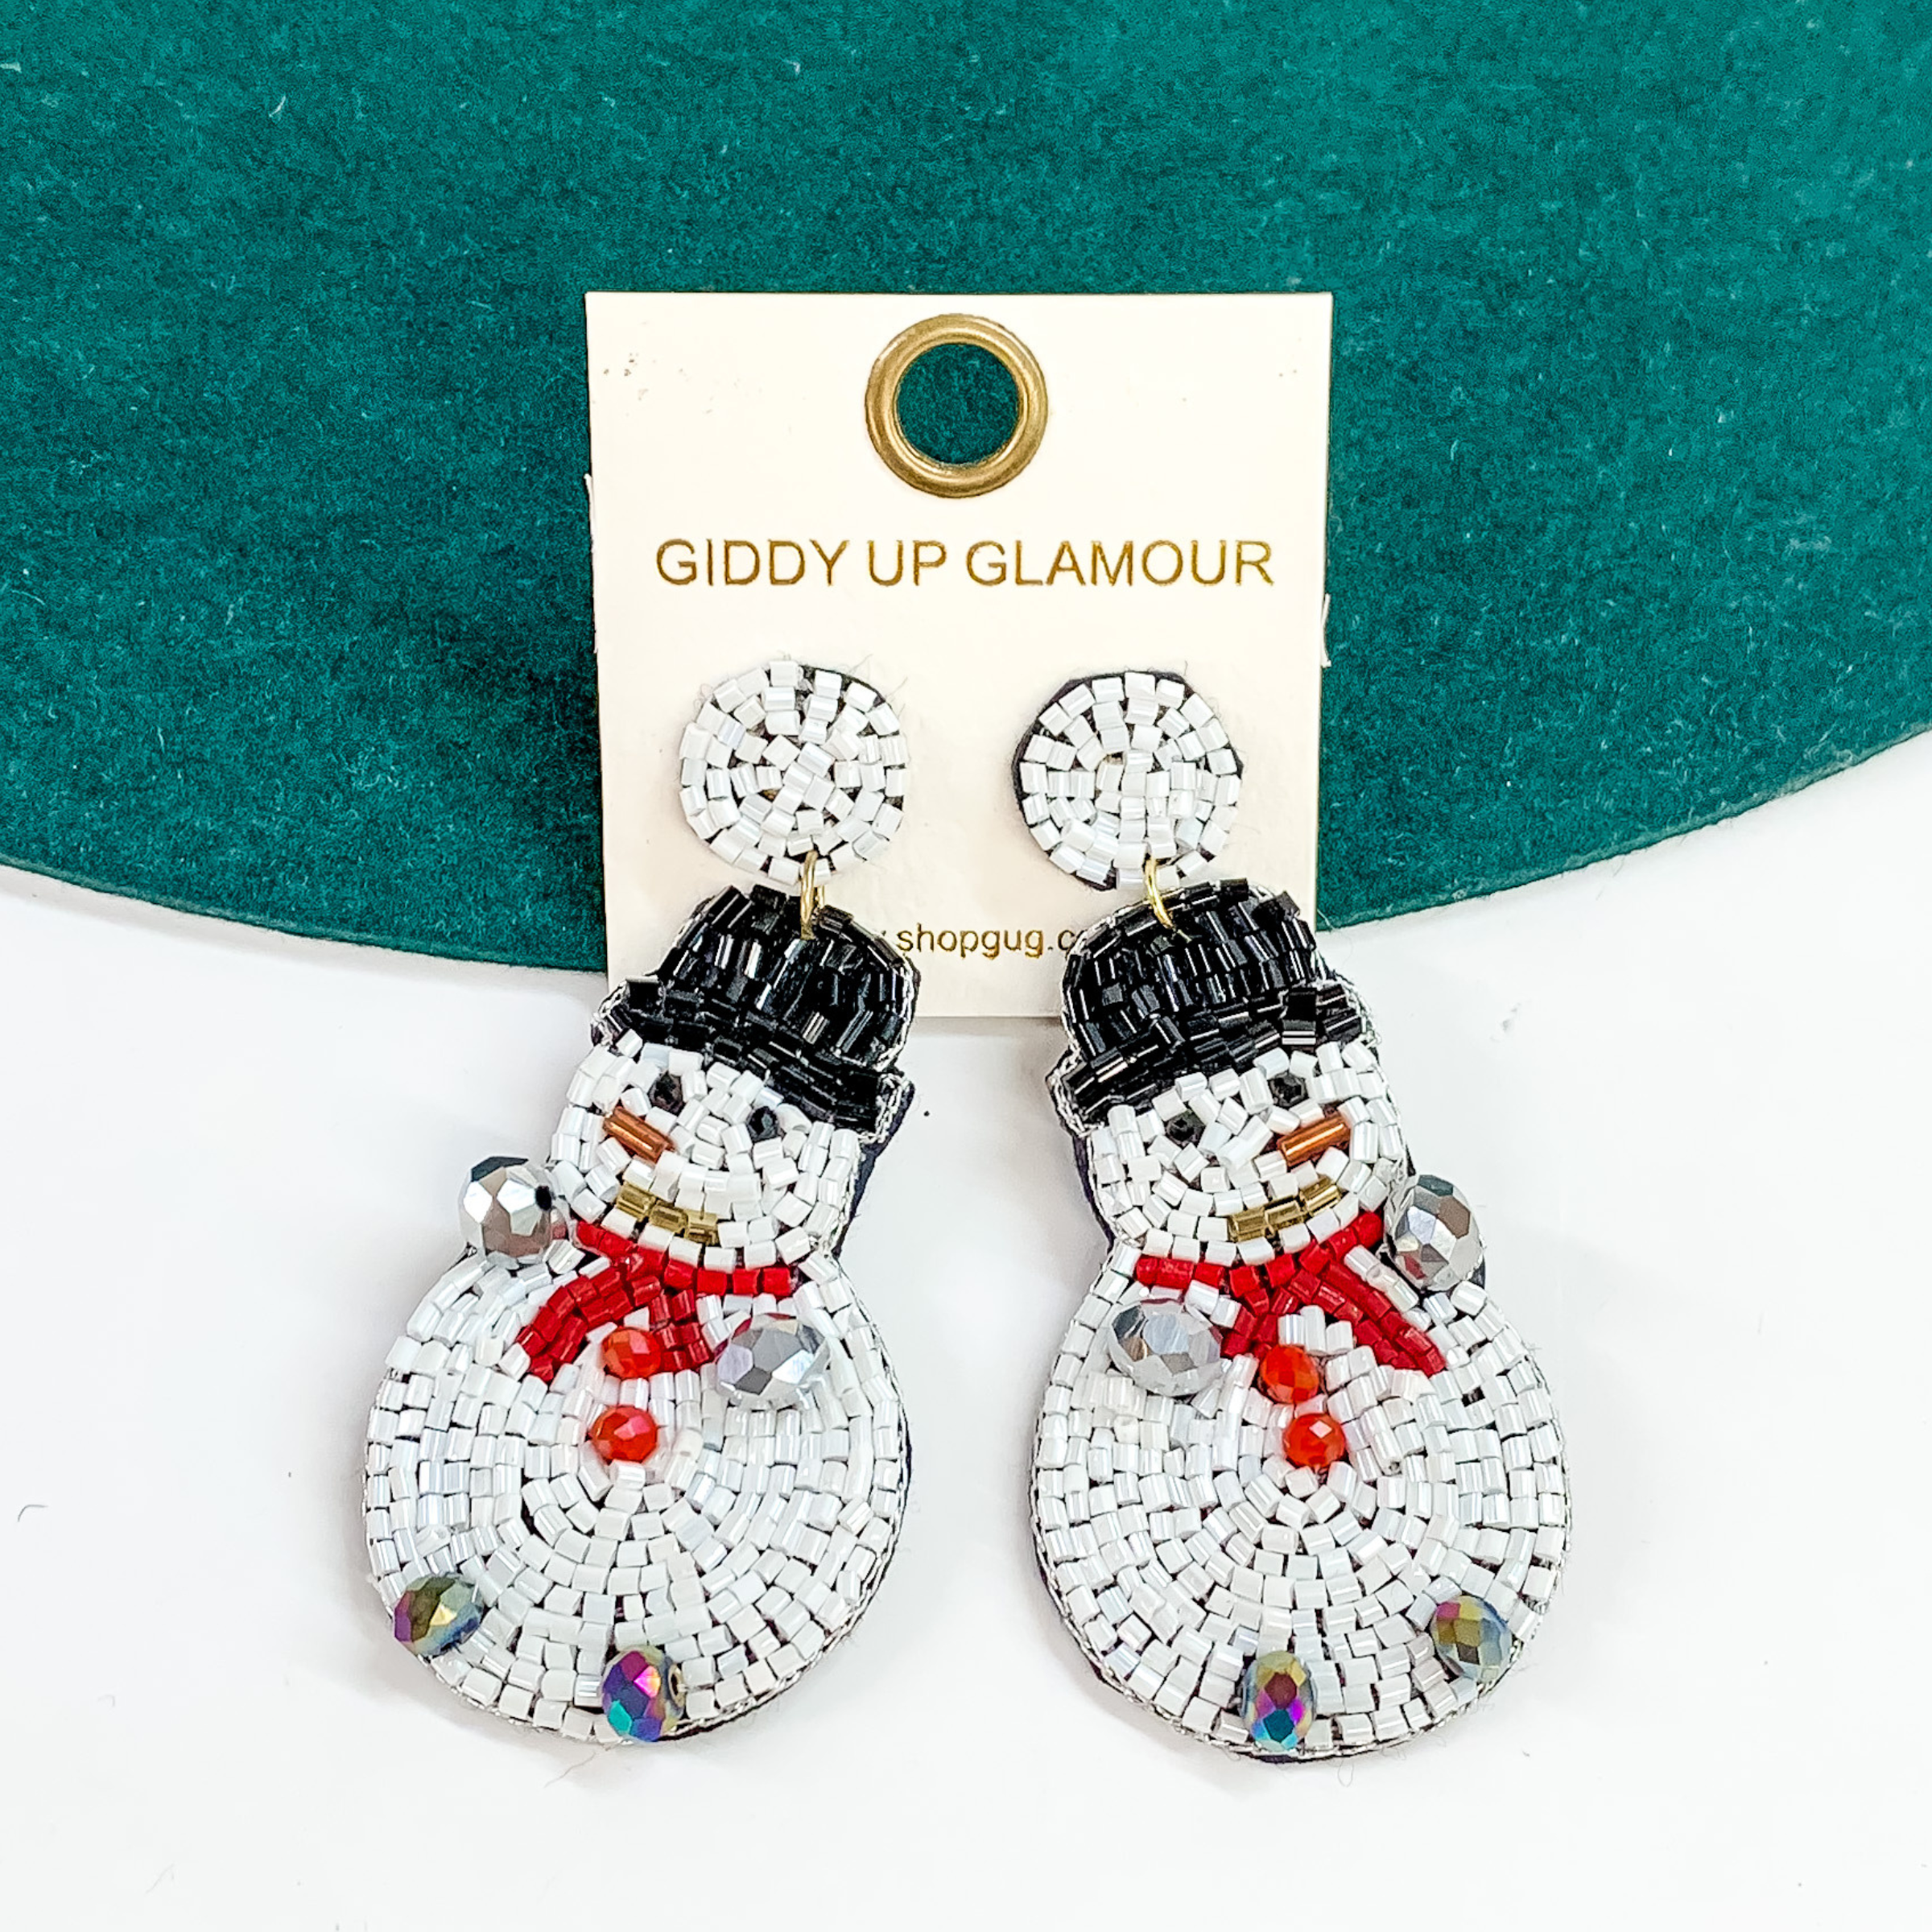 White beaded dangle snowman earrings. These earrings include the face of the snowman, a top hat, and beads for hands and feet. These earrings are pictured partially laying on a green hat brim on a white background. 